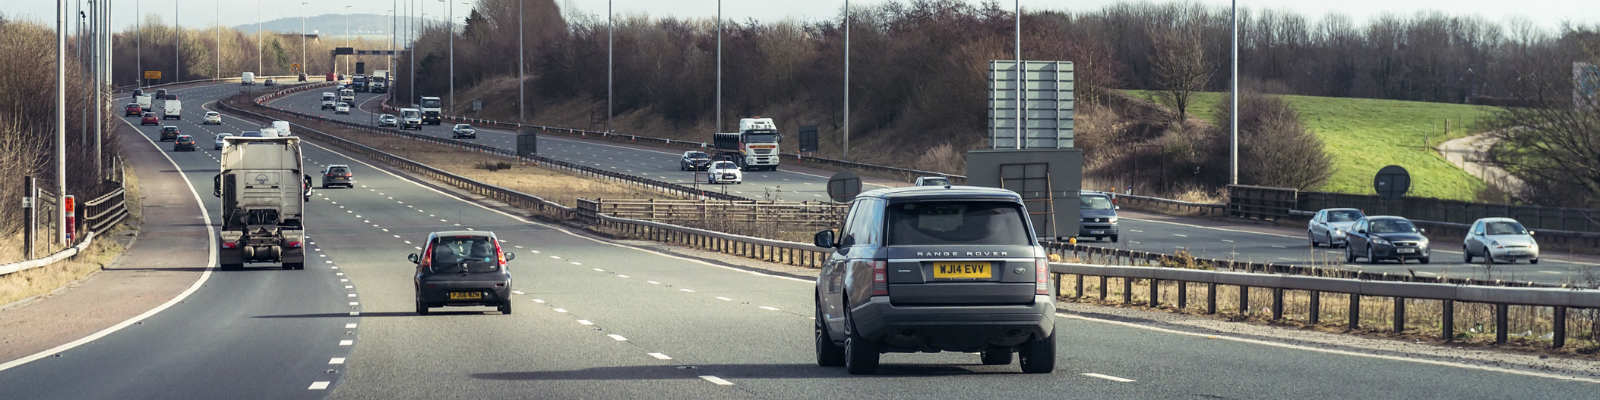 Traffic on the M6 Motorway in England